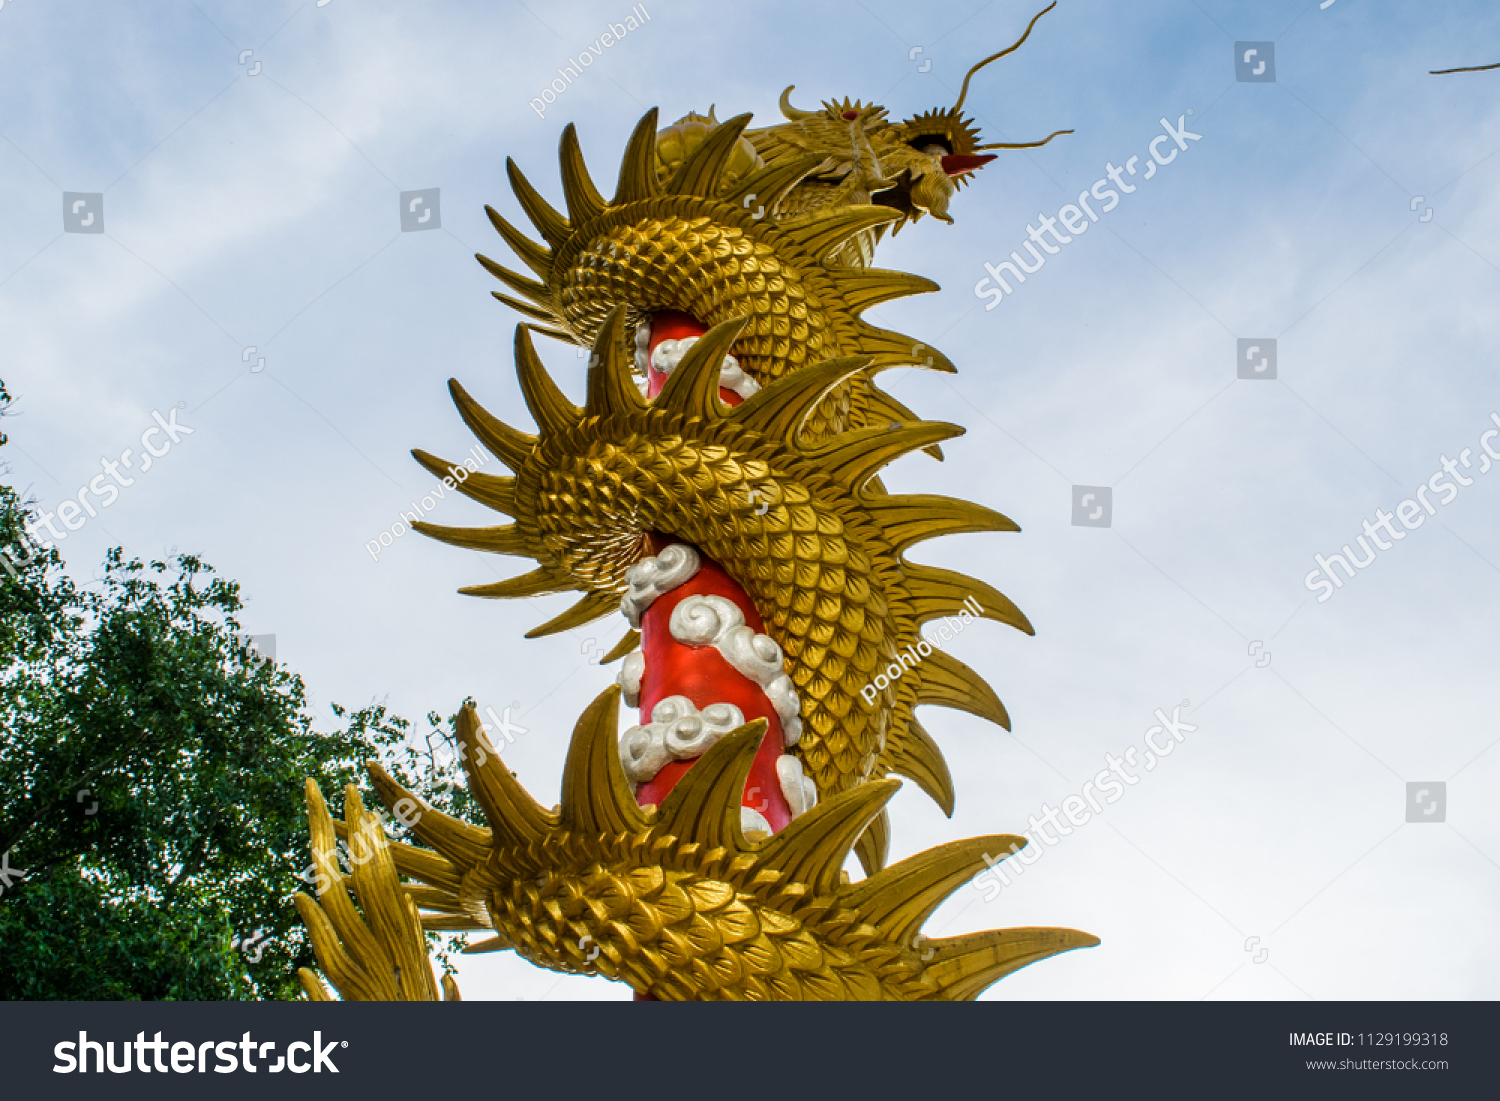 Numerous dragons coiled round pillars #1129199318